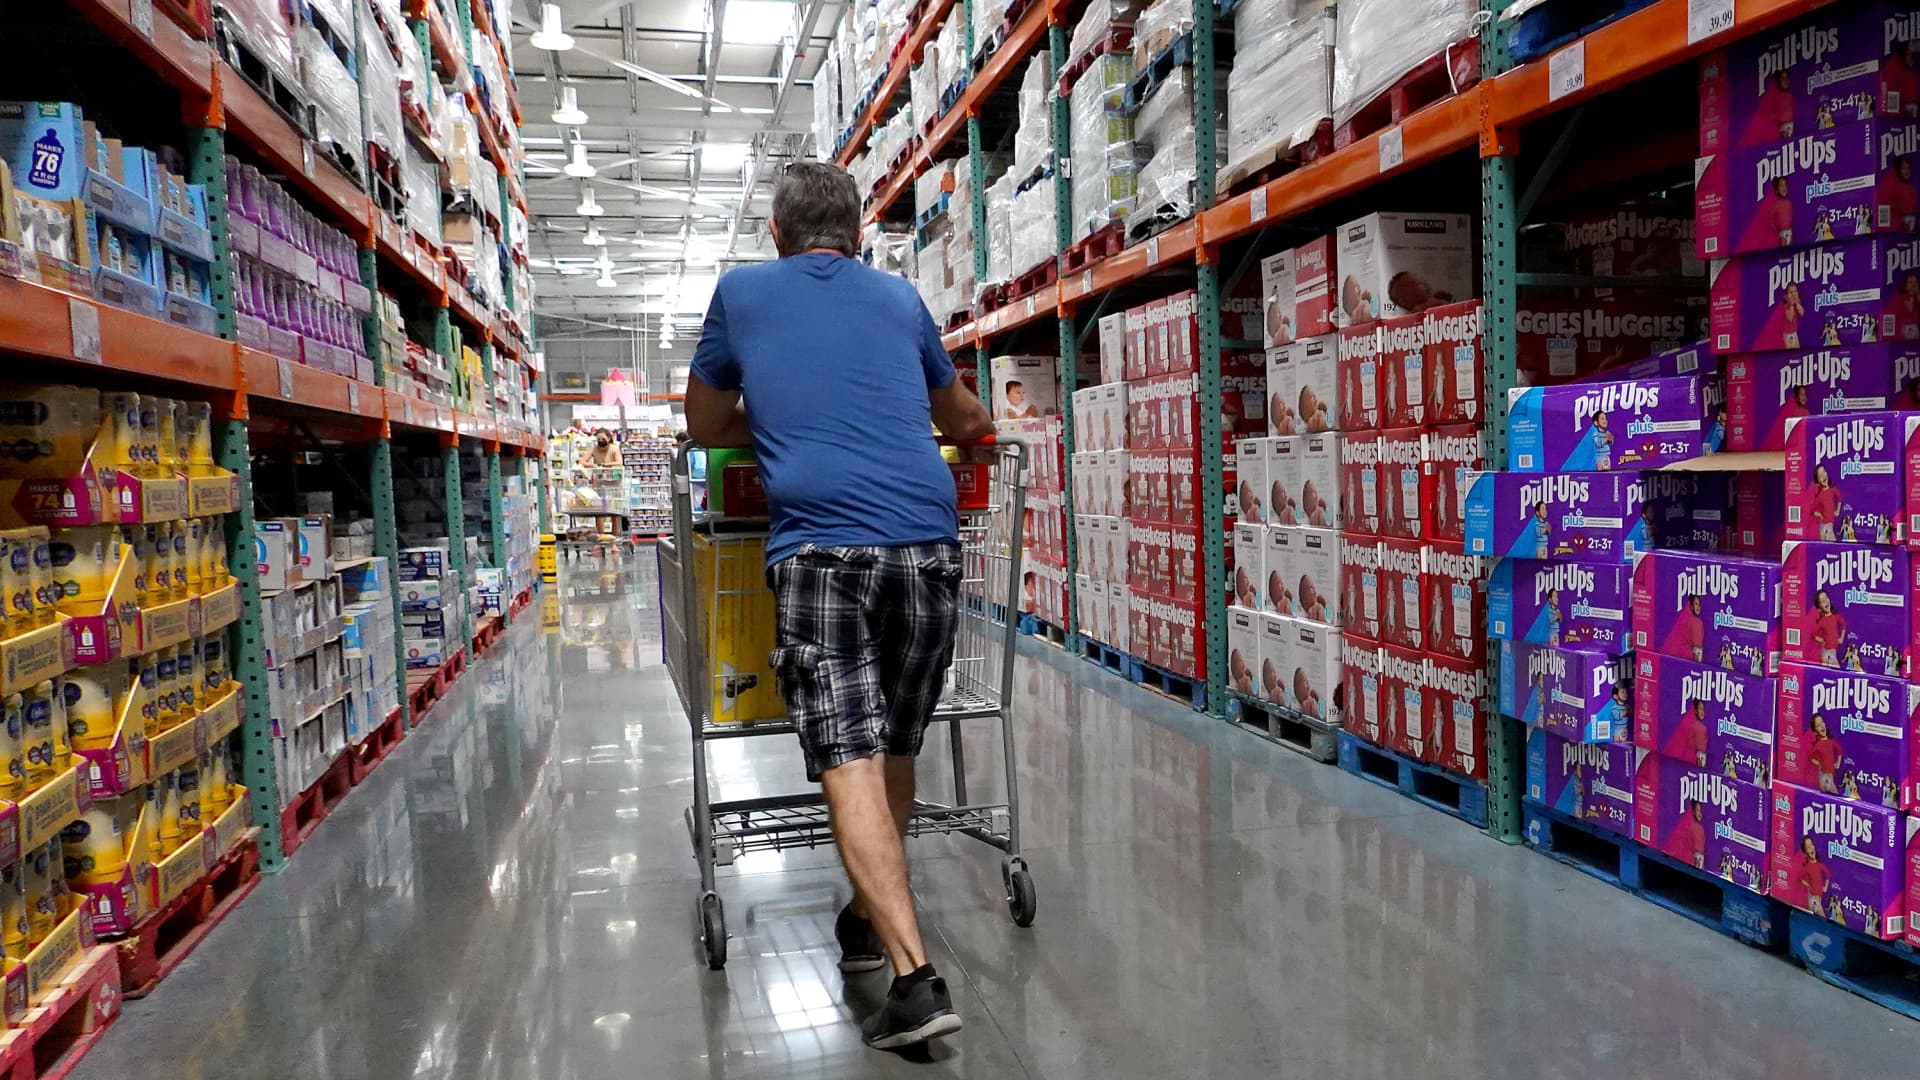 Skip these 5 household items at Costco—they aren't worth the discount, says expert at finding deals